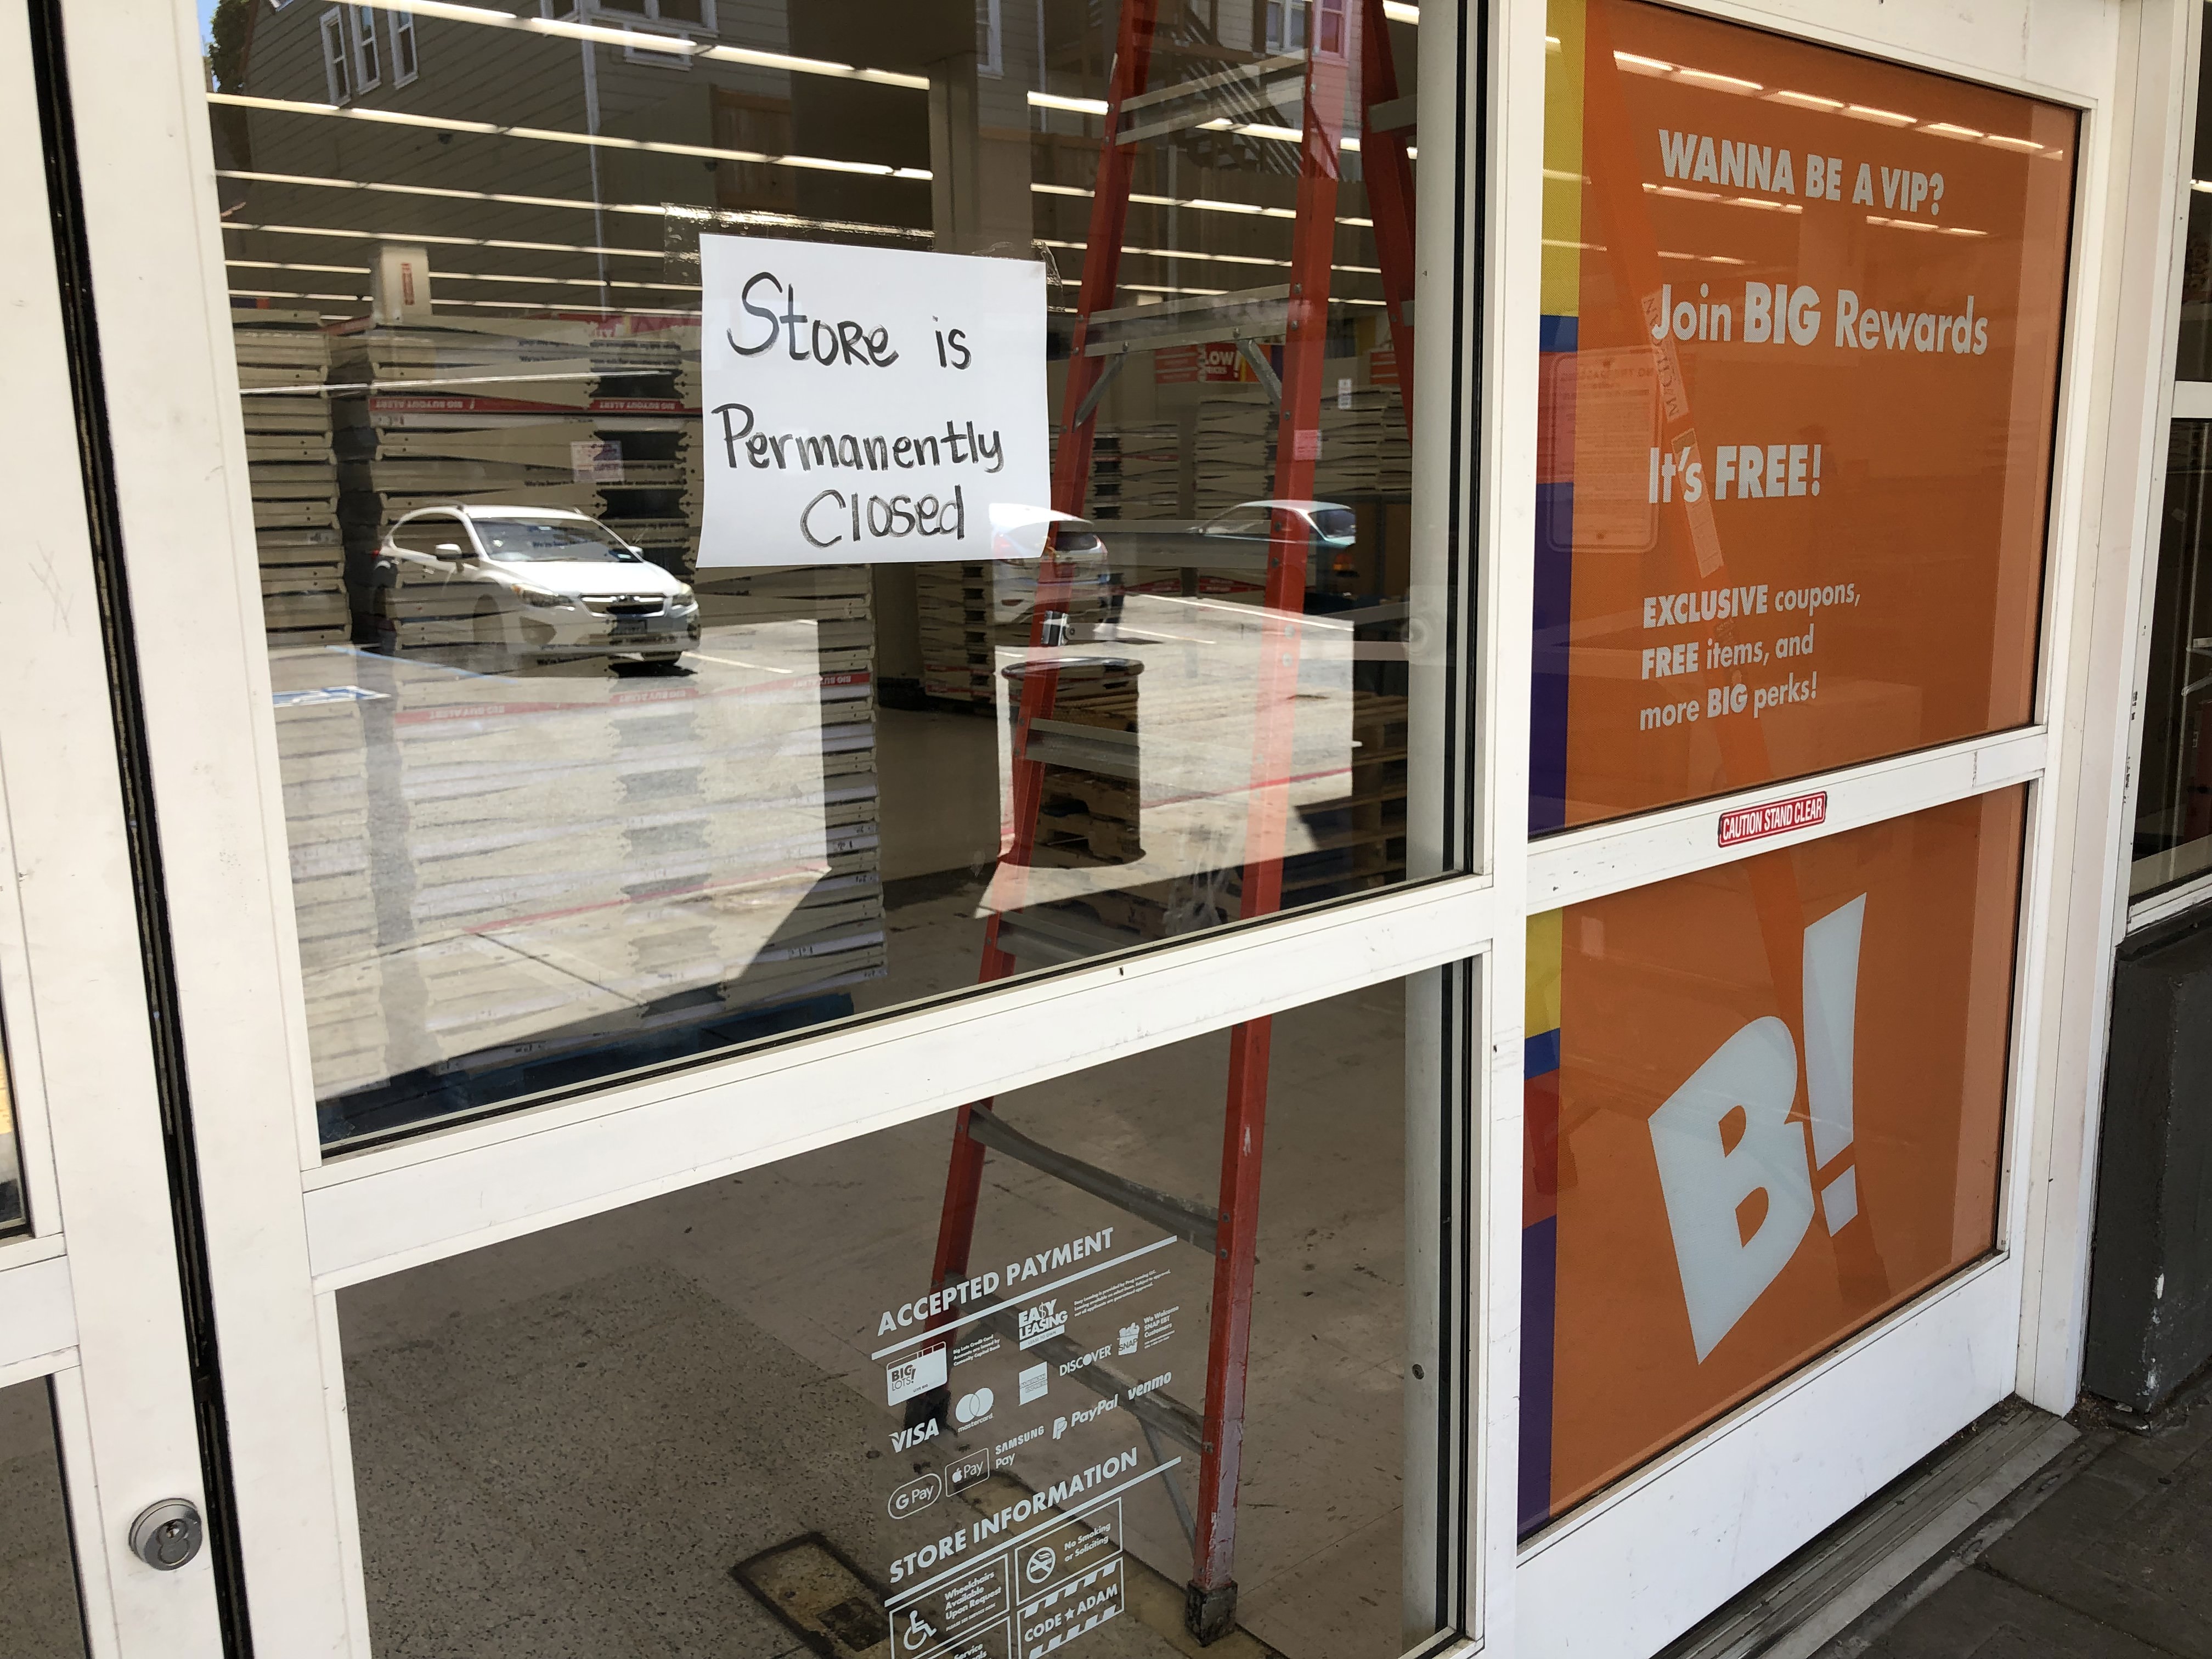 The Mission Street Big Lots has permanently closed